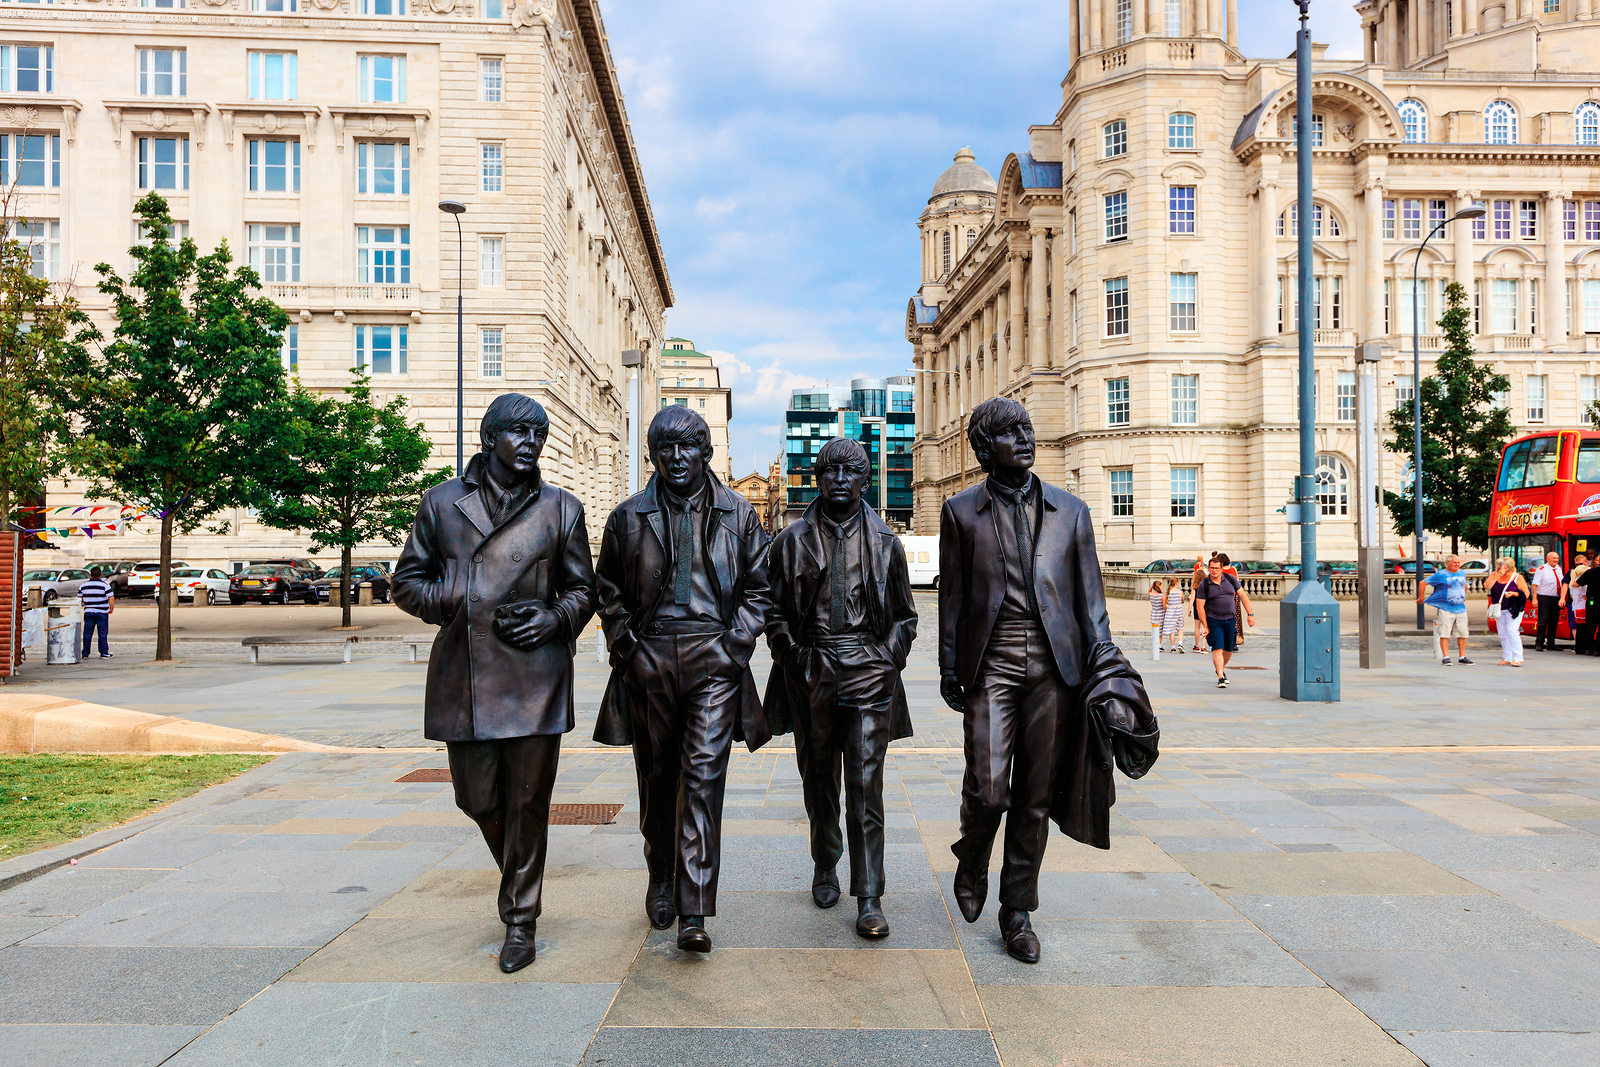 Top Sites To Enjoy In Liverpool This Mother’s Day